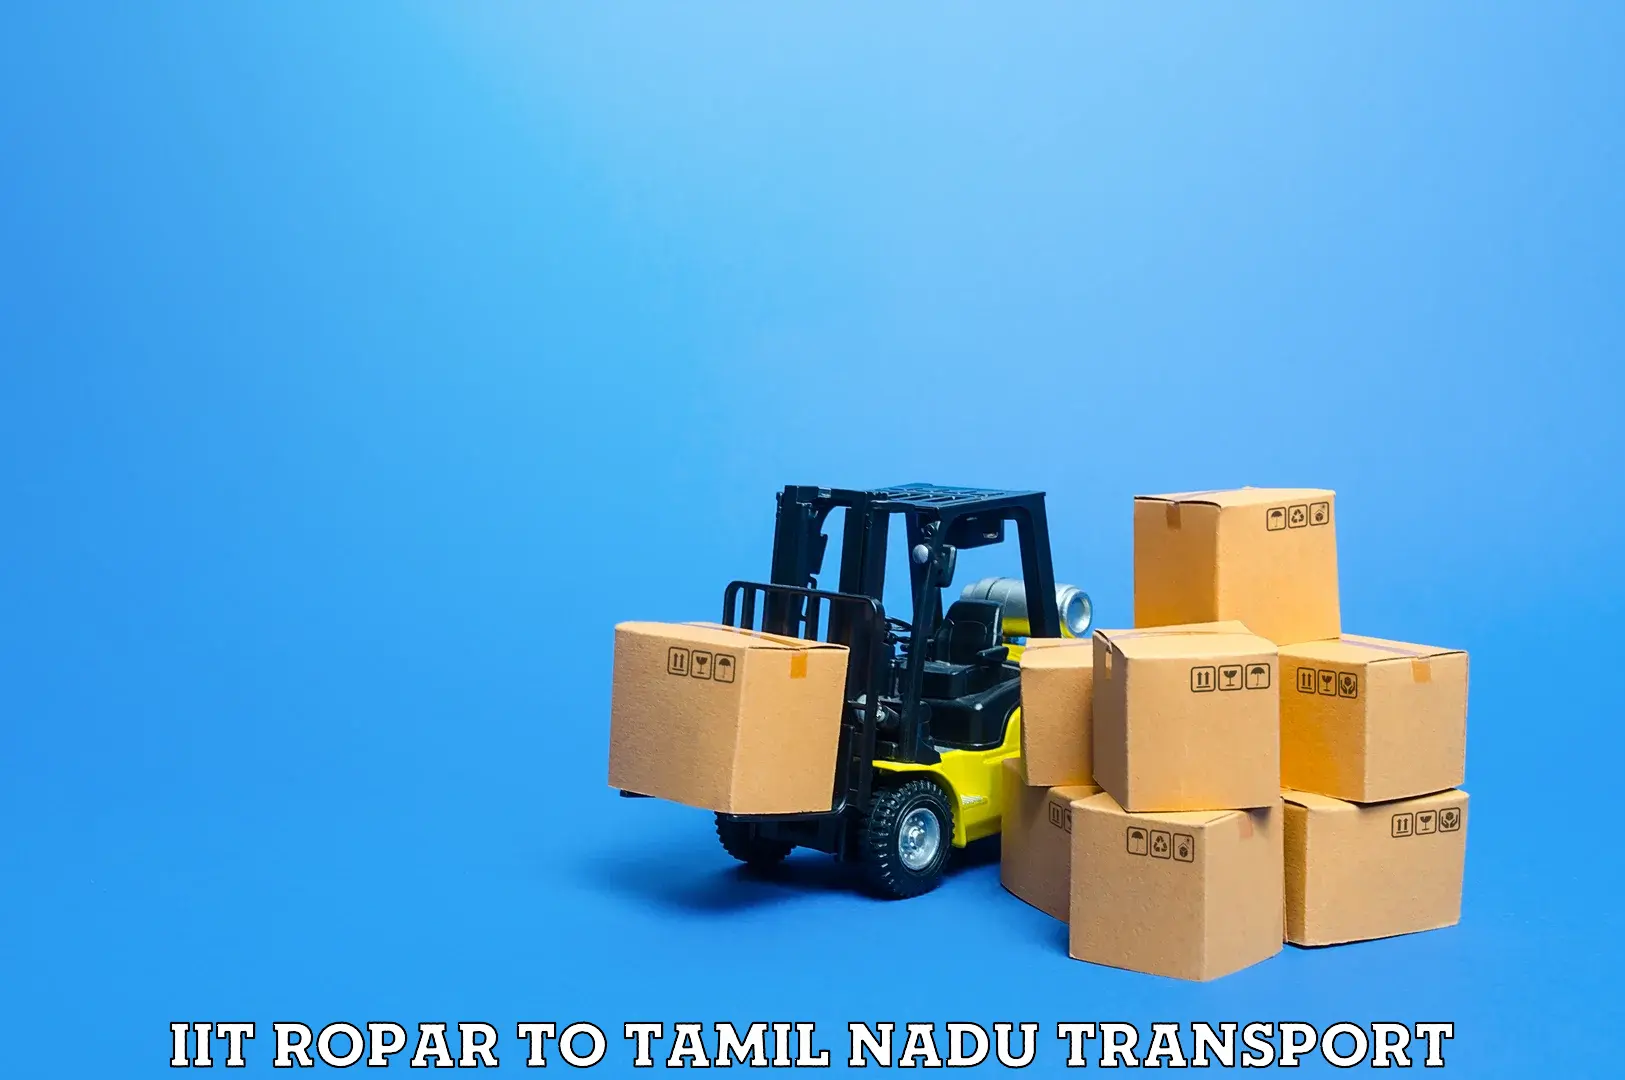 Vehicle transport services IIT Ropar to Chennai Port